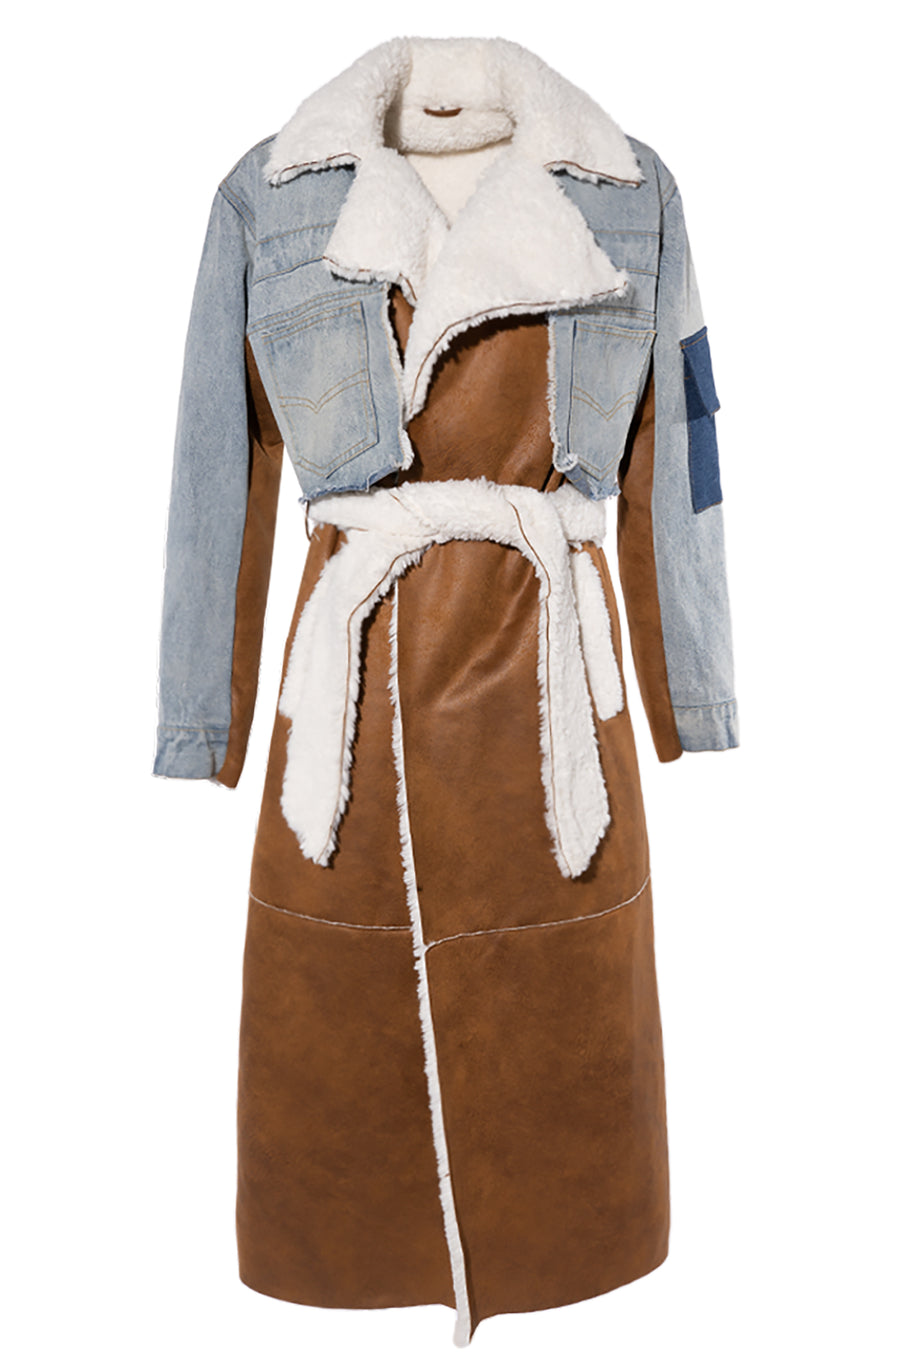 Front view of trench coat with faux suede base, denim sleeves, and shearling belt and lining